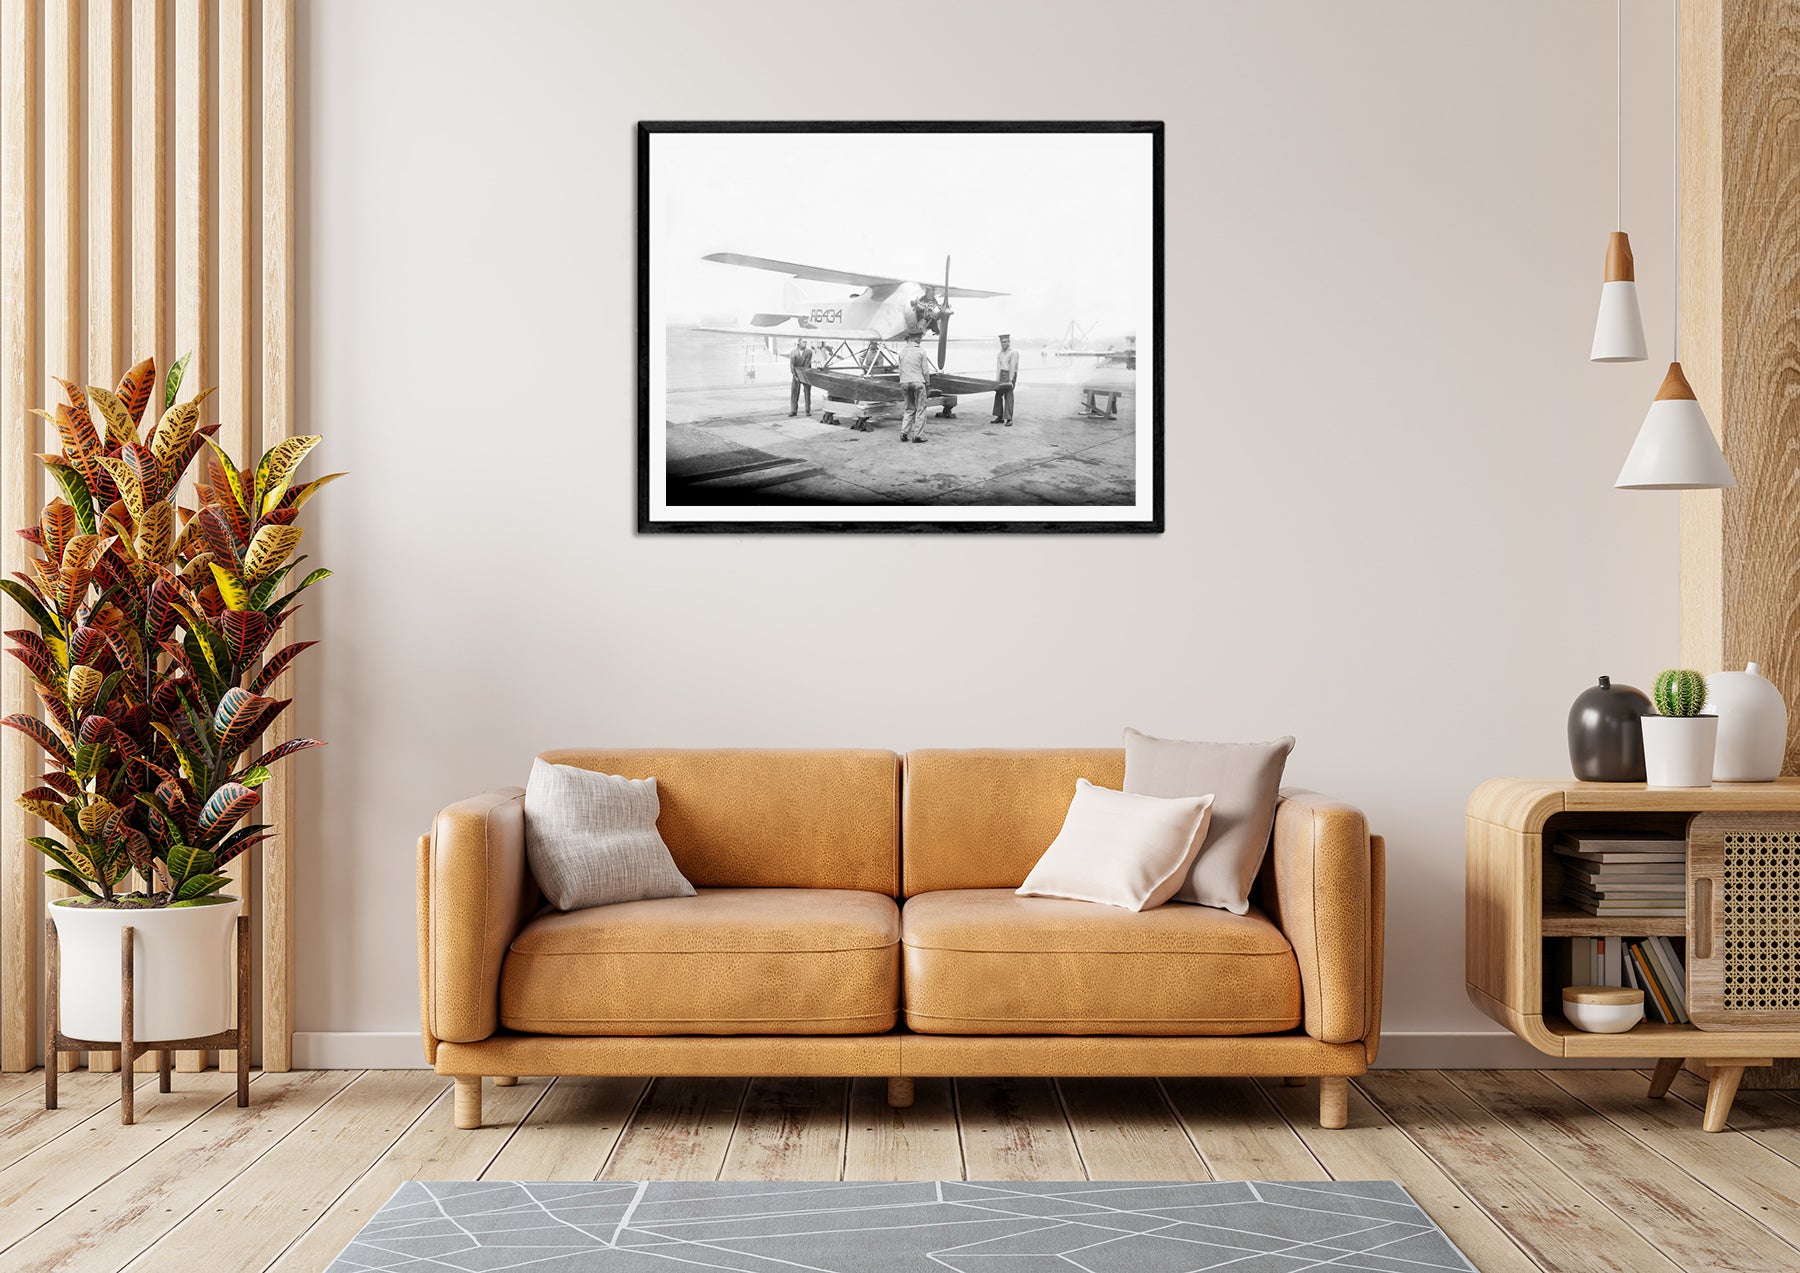 A framed paper print of a photograph of a submarine plane hanging above a yellow couch